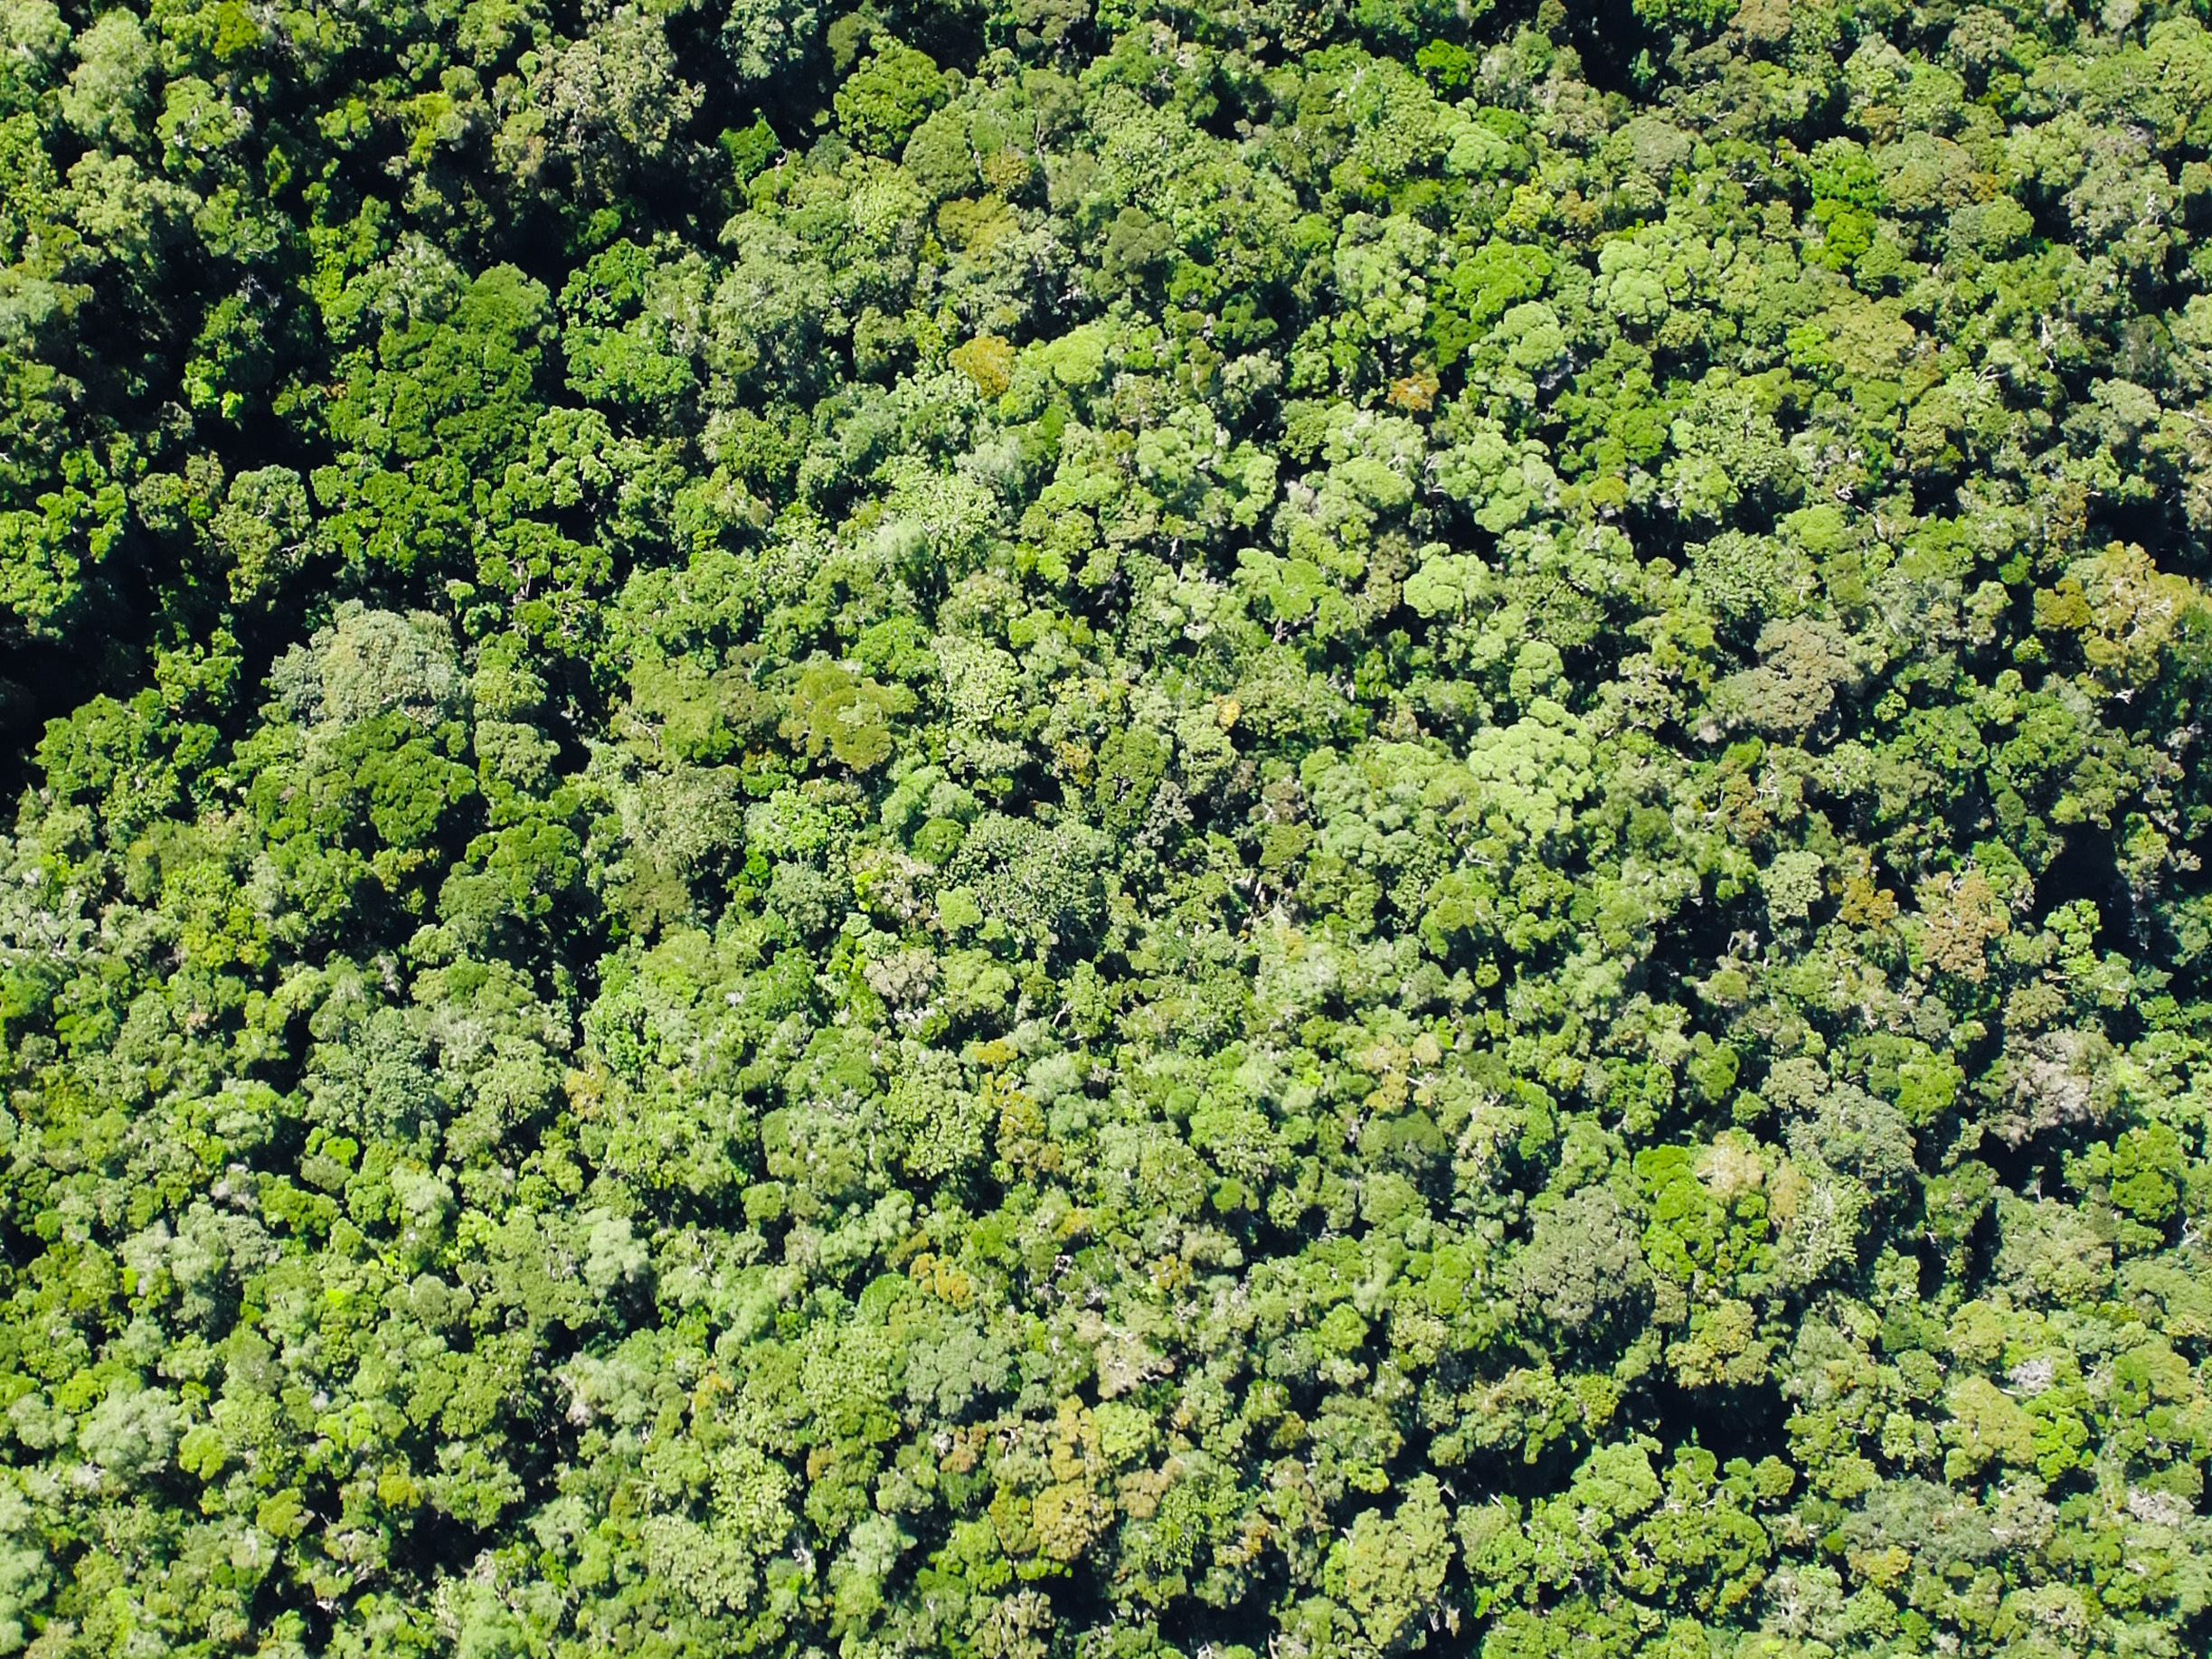 Seen from far above, treetops are so densely packed that no ground is visible